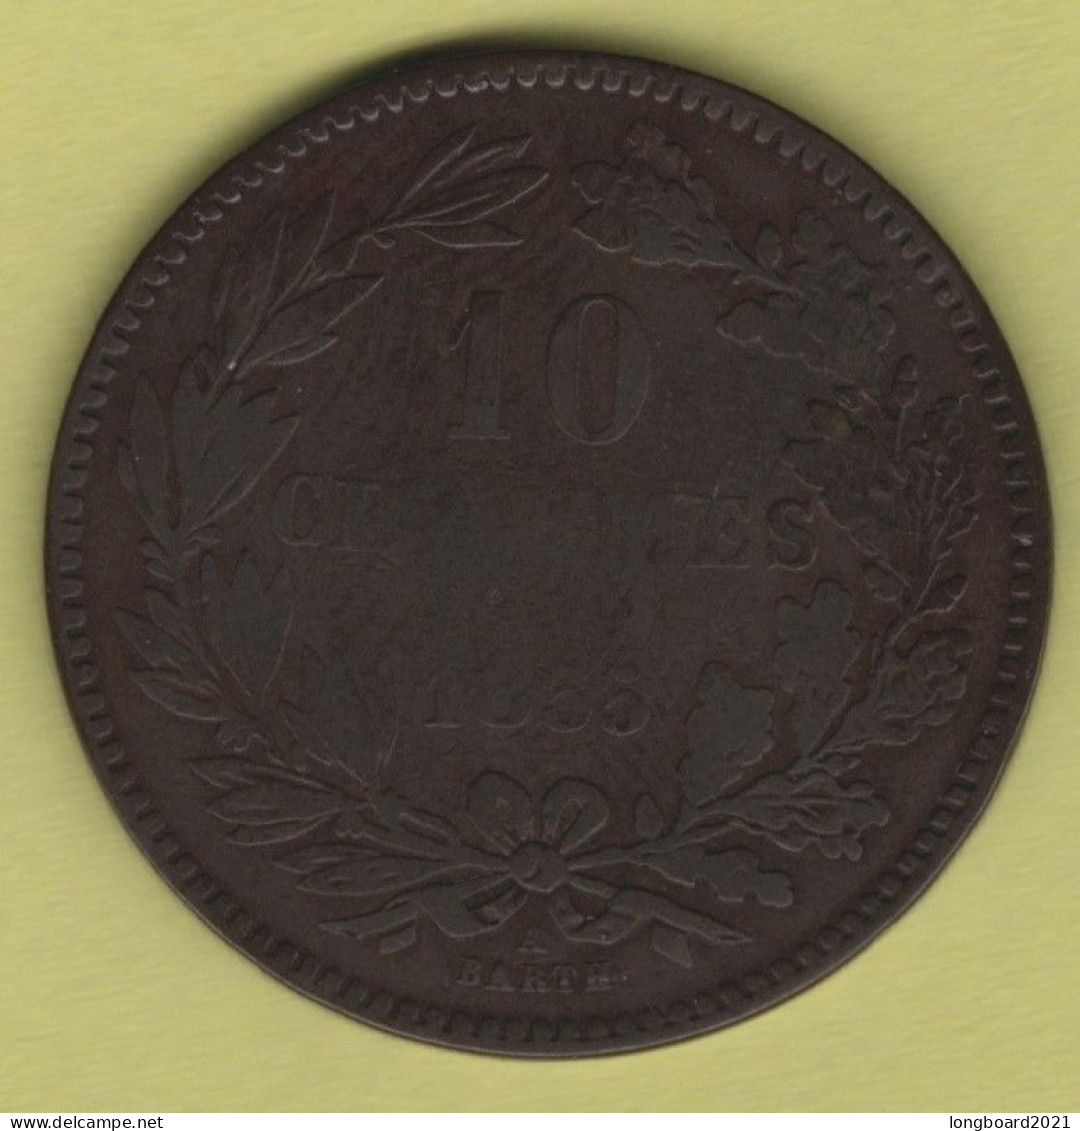 LUXEMBOURG - 10 CENTIMES 1855 - Luxembourg